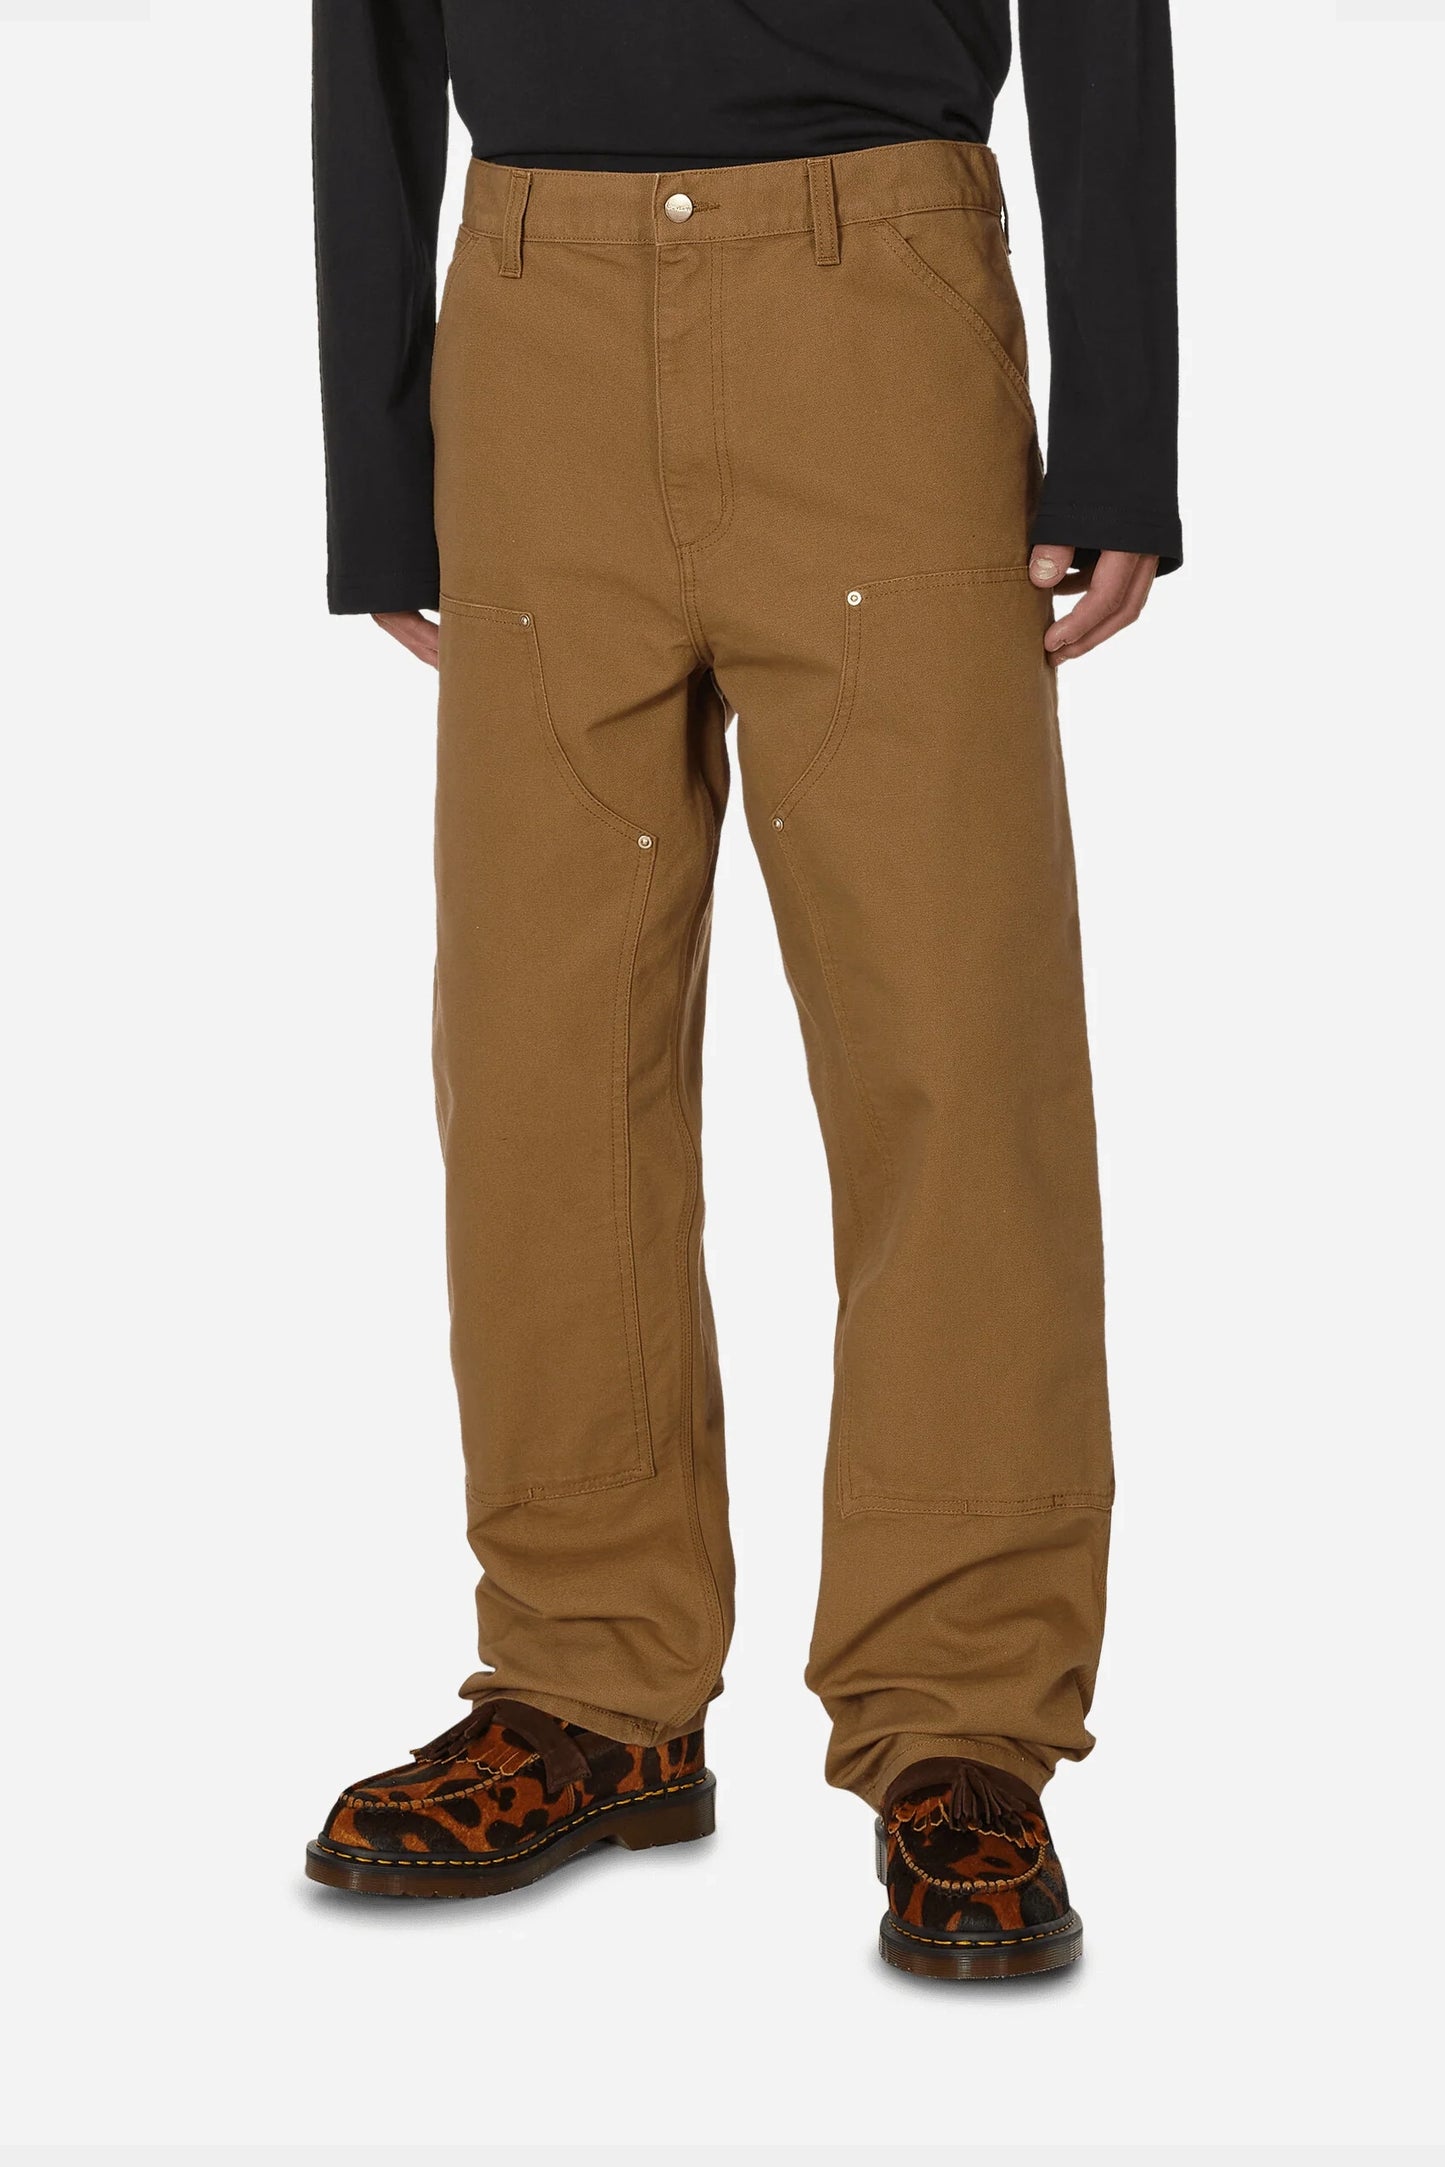 DOUBLE KNEE PANT (Hamilton Brown Rinsed)